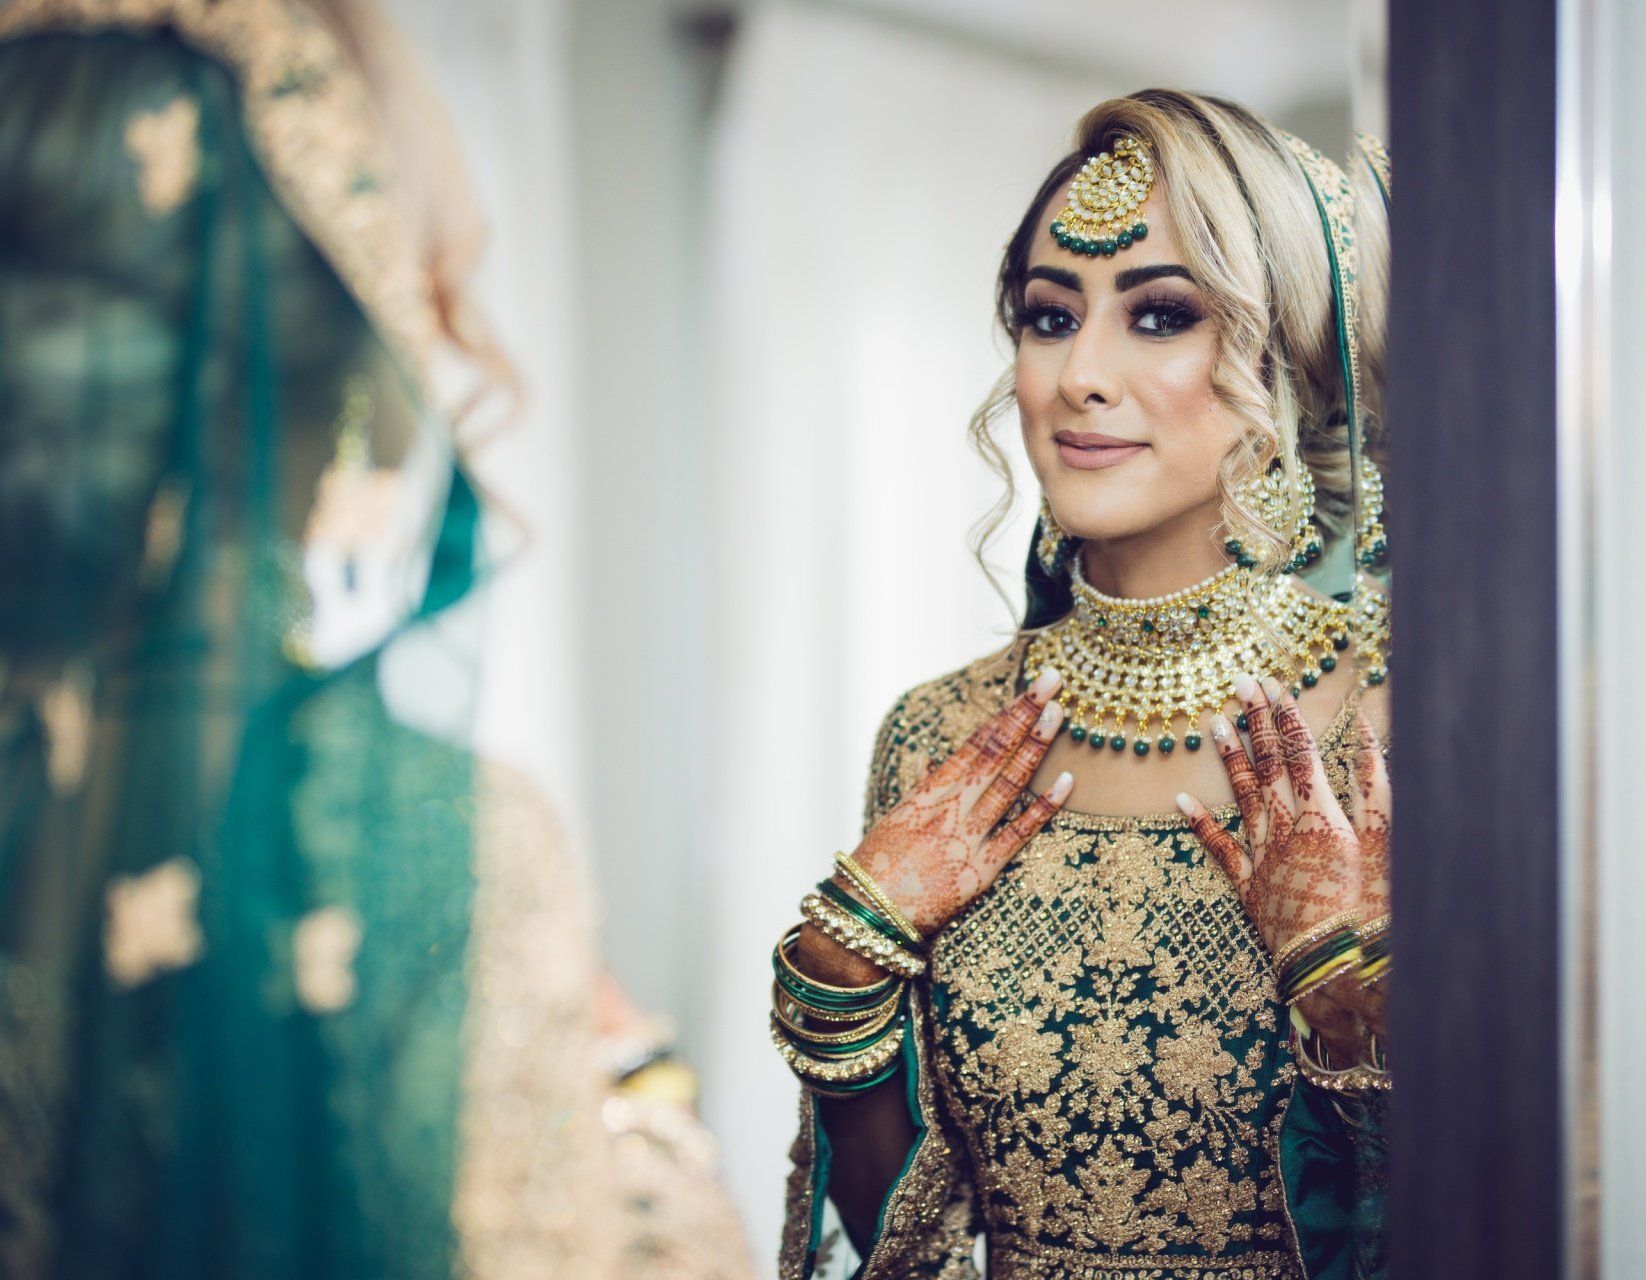 Best Indian Wedding Photographer in NY and FL | Best NY FL Wedding Photographer | Indian Caribbean Wedding Photoshoots